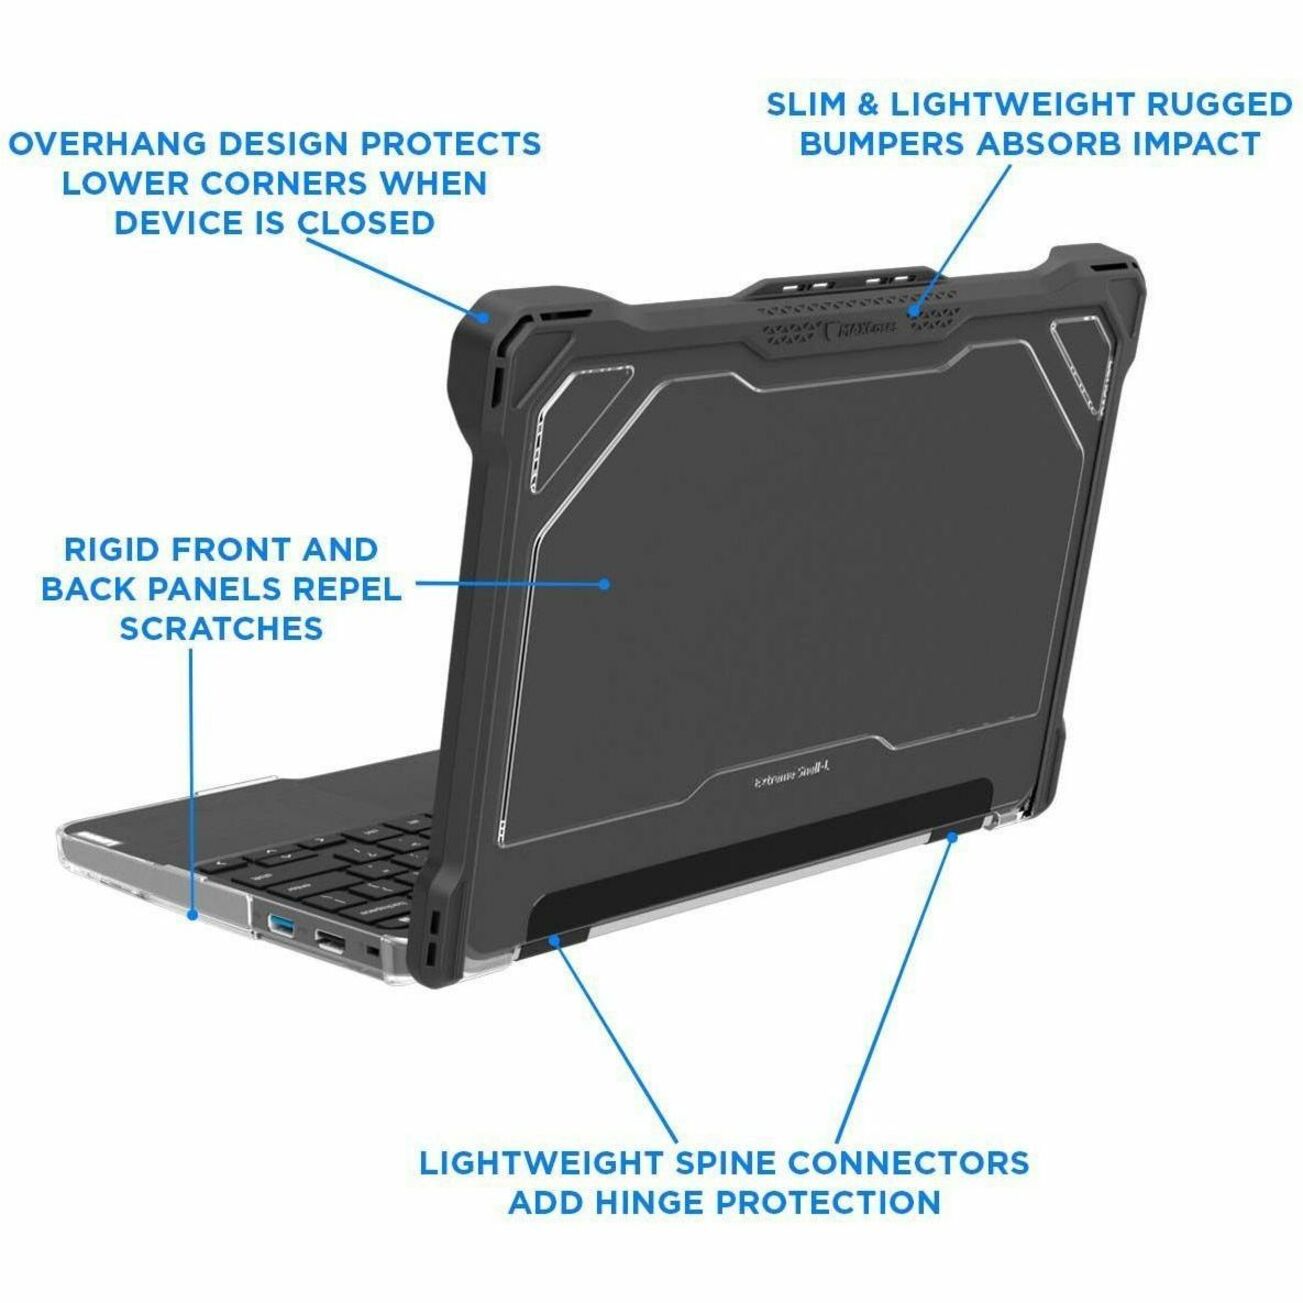 MAXCases Extreme Shell-L Rugged Case for Asus BR1100FKA-XS04T 11.6" Windows 10 (Black) [Discontinued]